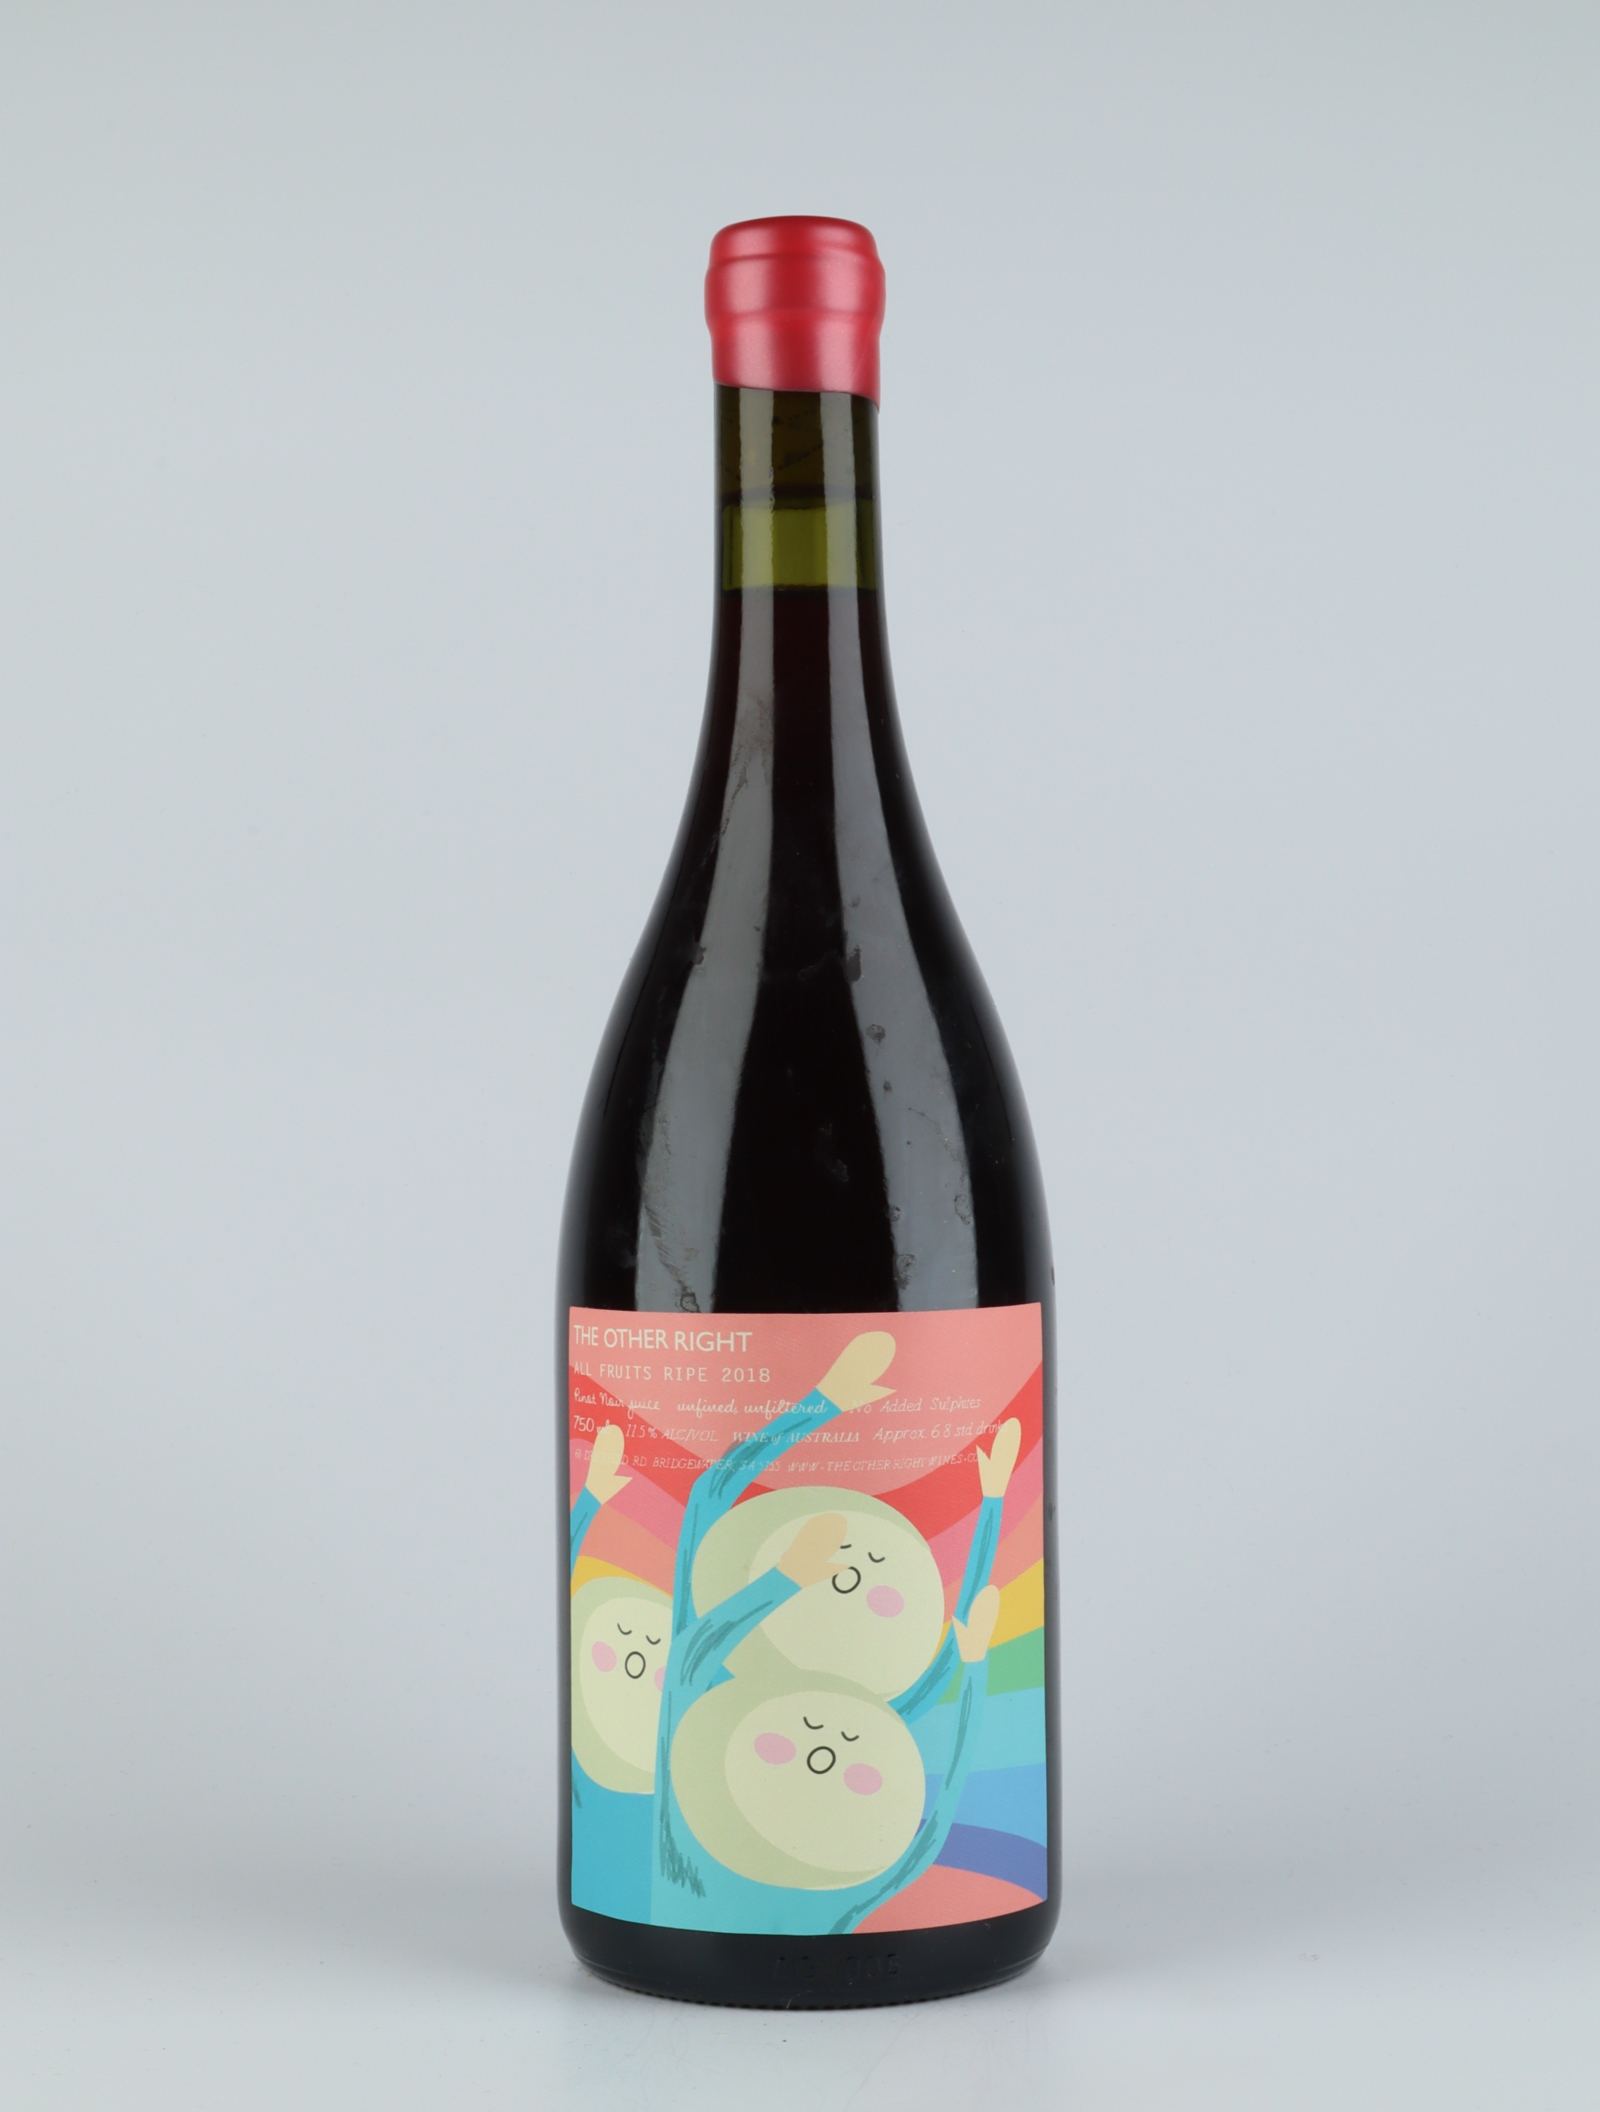 A bottle 2018 All Fruits Ripe Red wine from The Other Right, Adelaide Hills in Australia